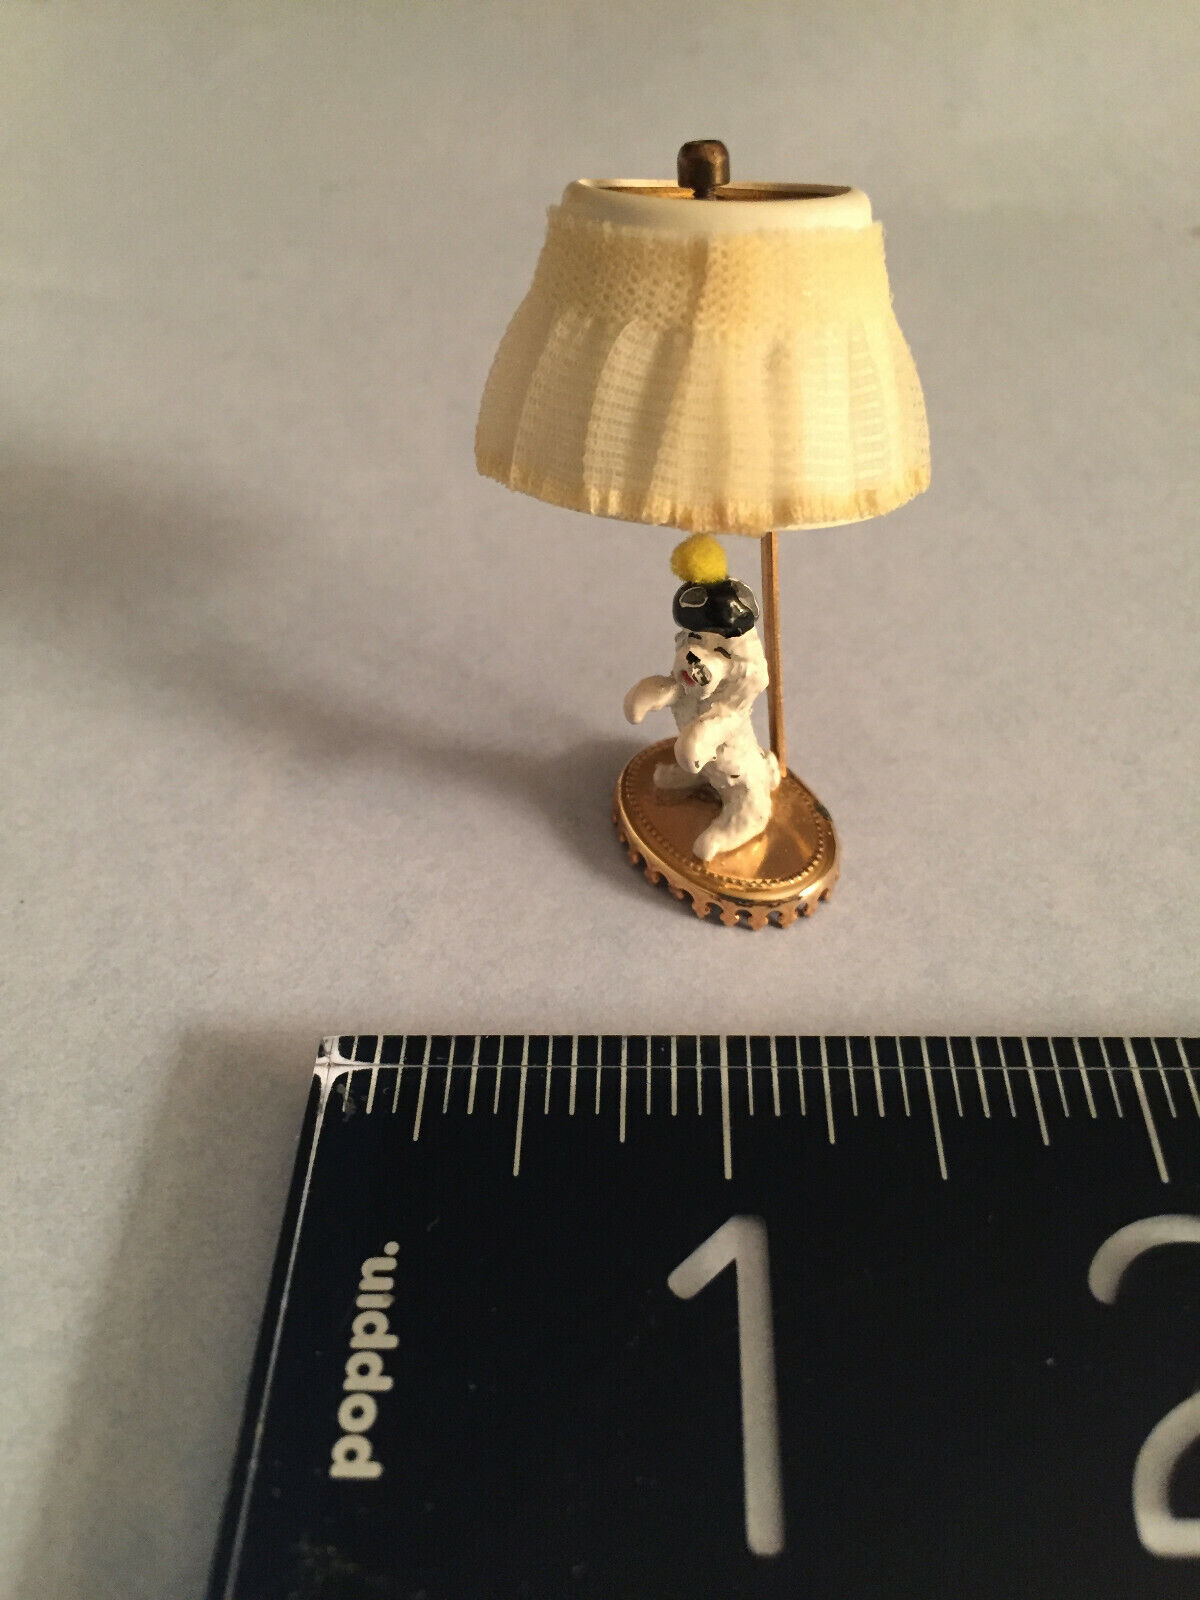 Raleigh Mall Rare Chrysnbon DOLLHOUSE miniature NURSERY in poodle lamp Limited price hat w